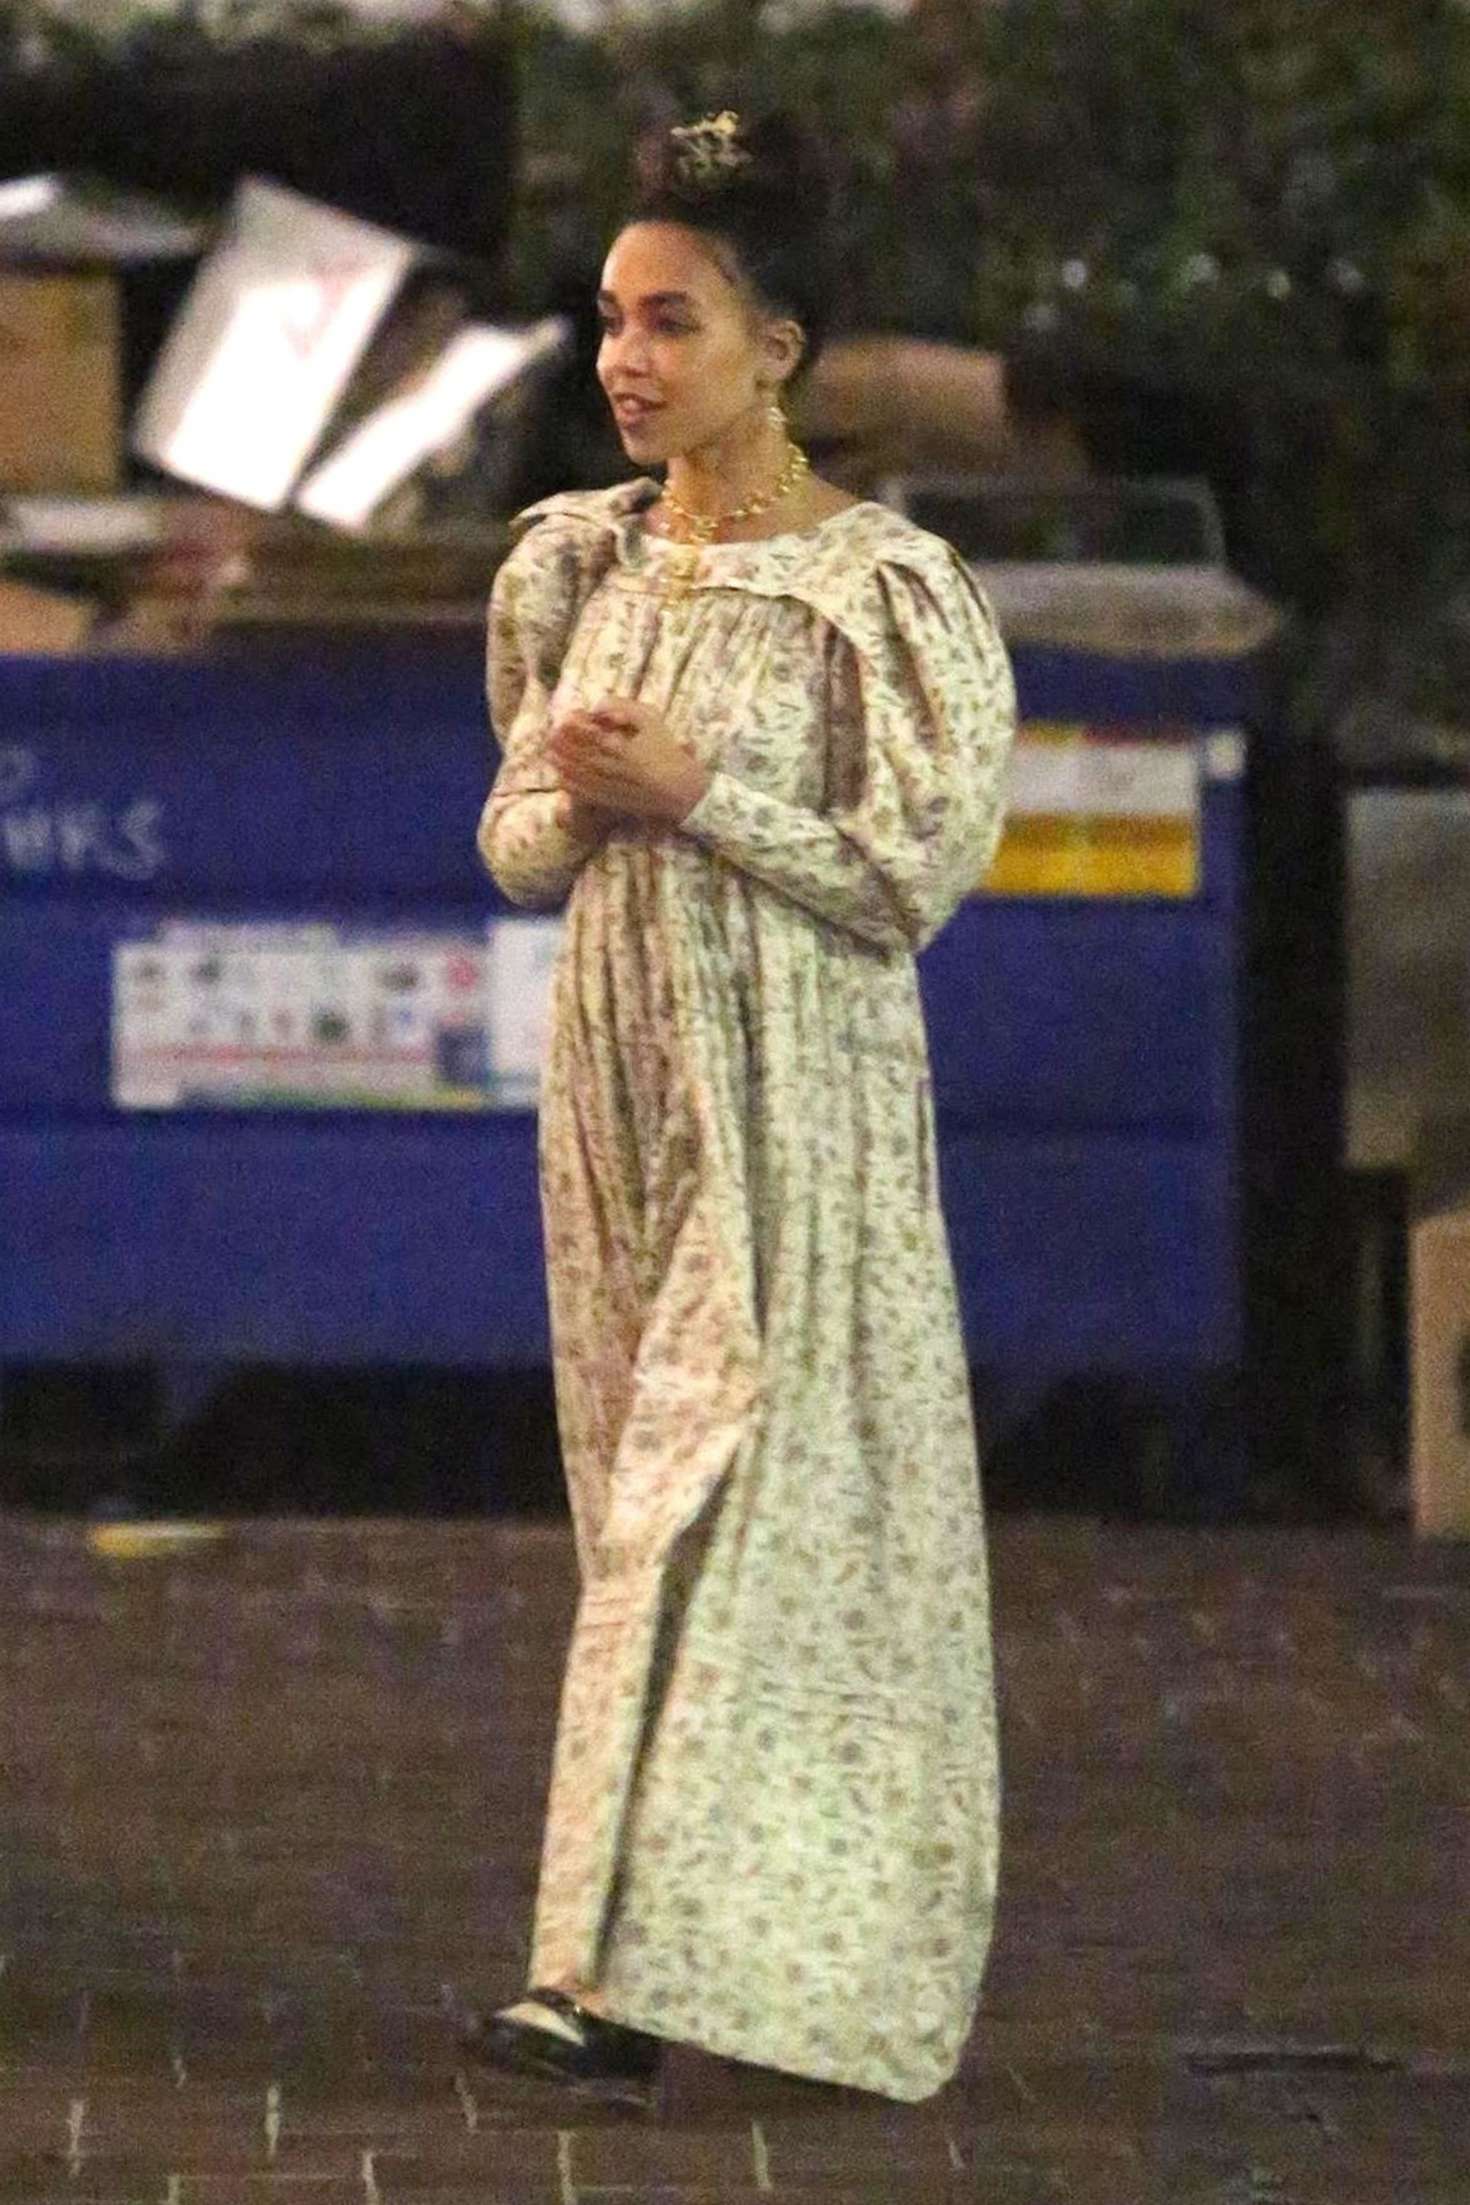 FKA Twigs and Shia LaBeouf â€“ Out for a Christmas Eve dinner in Los Feliz